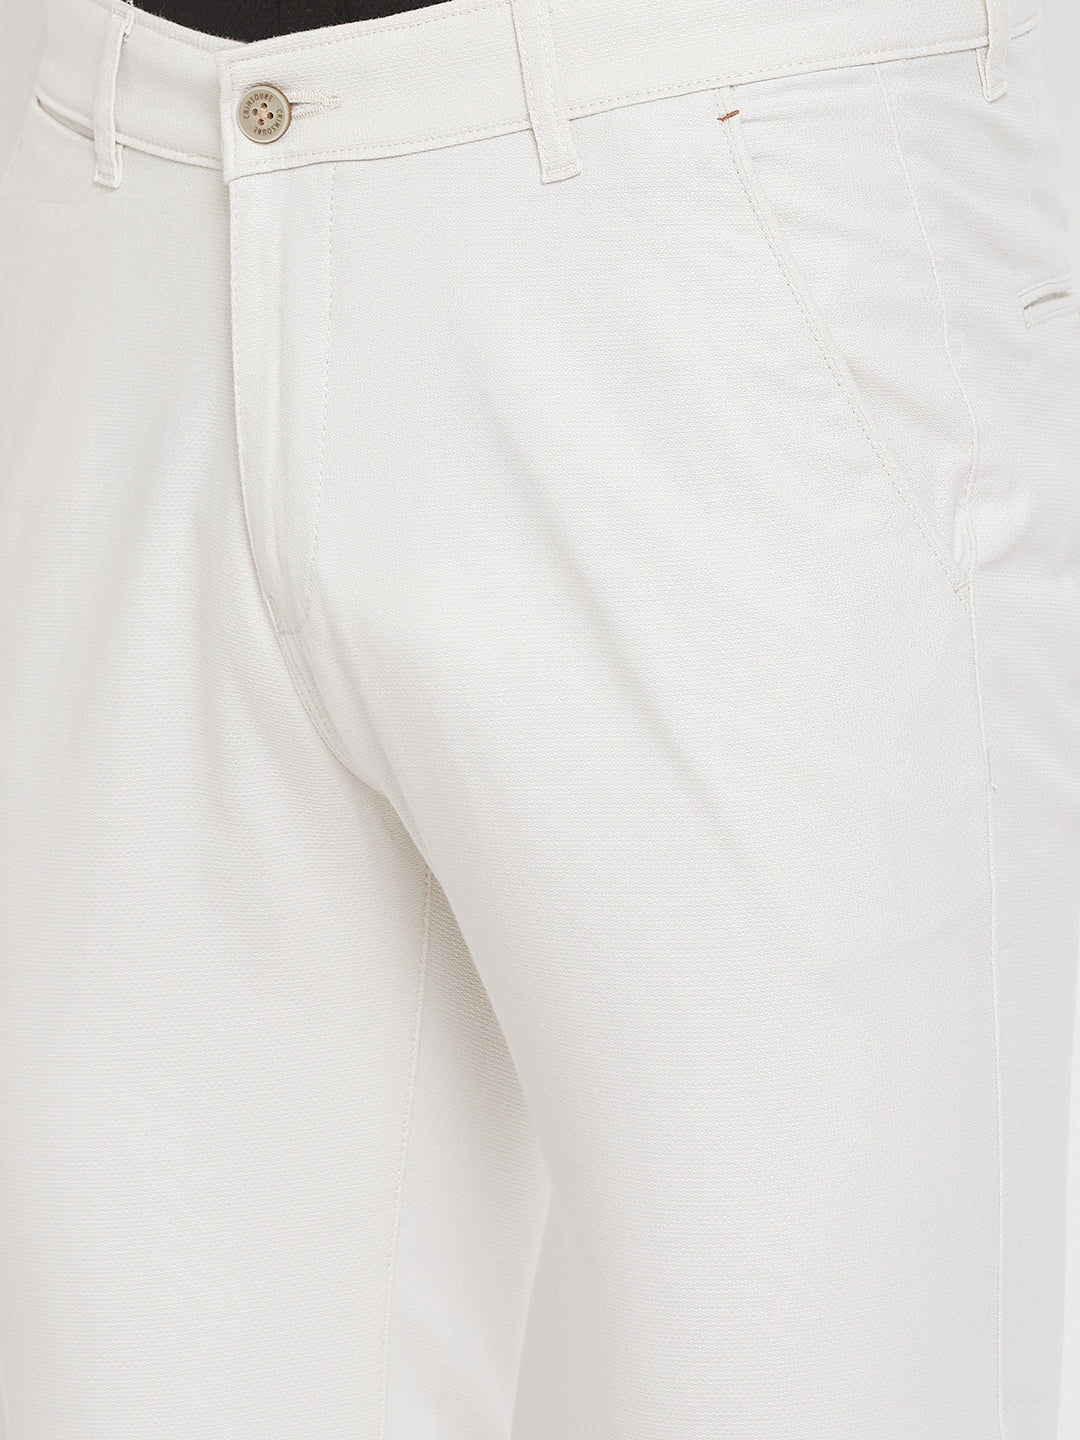 Off White Slim Fit Trousers - Men Trousers